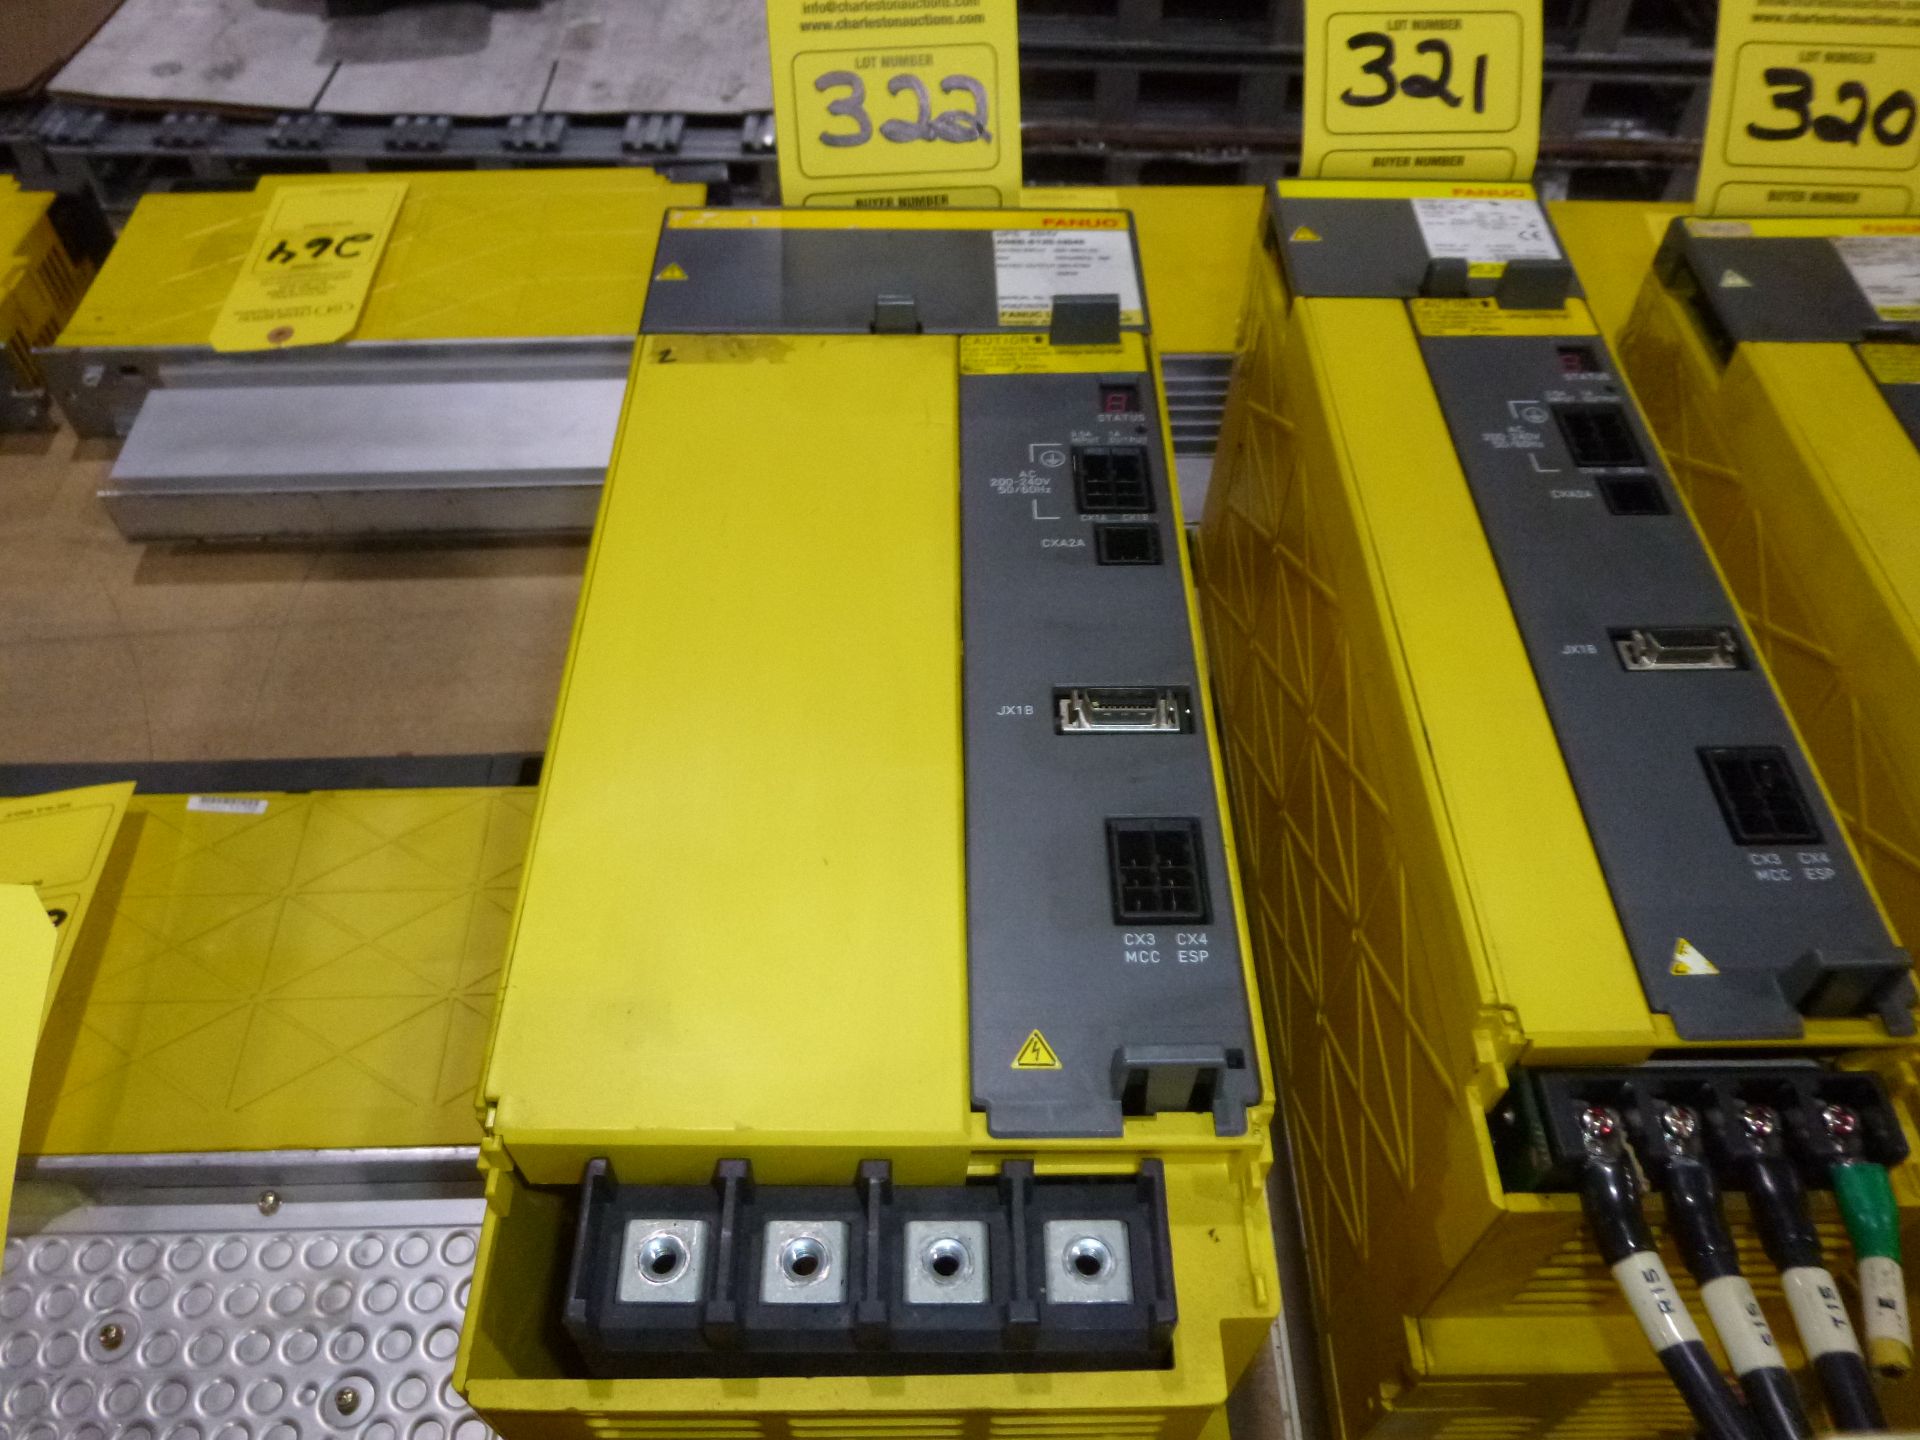 Fanuc module model A06B-6120-H045, as always with Brolyn LLC auctions, all lots can be picked up